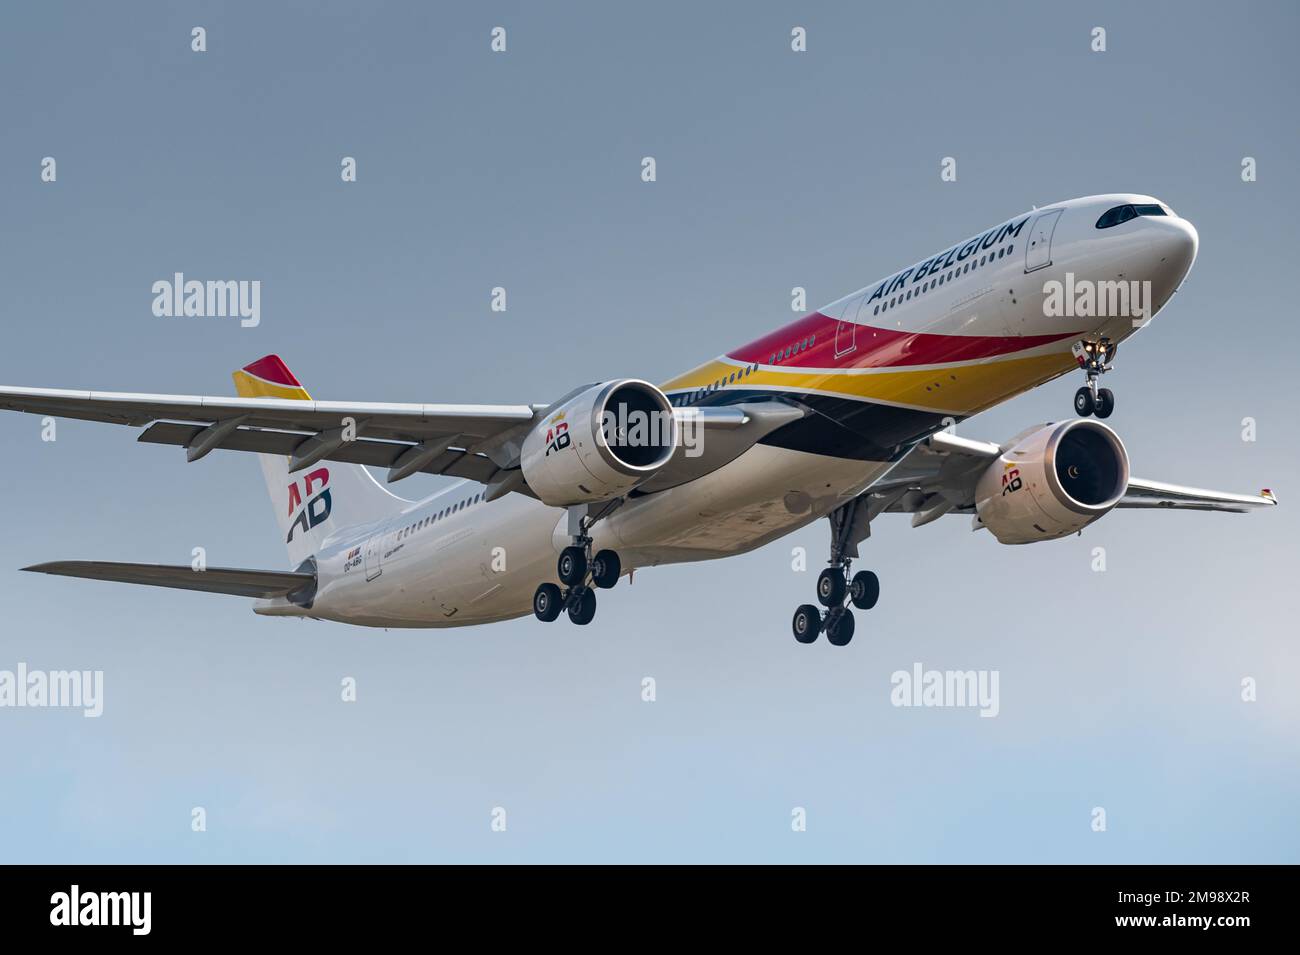 An Airbus A330 passenger aircraft of the Belgian airline company Air Belgium. Stock Photo